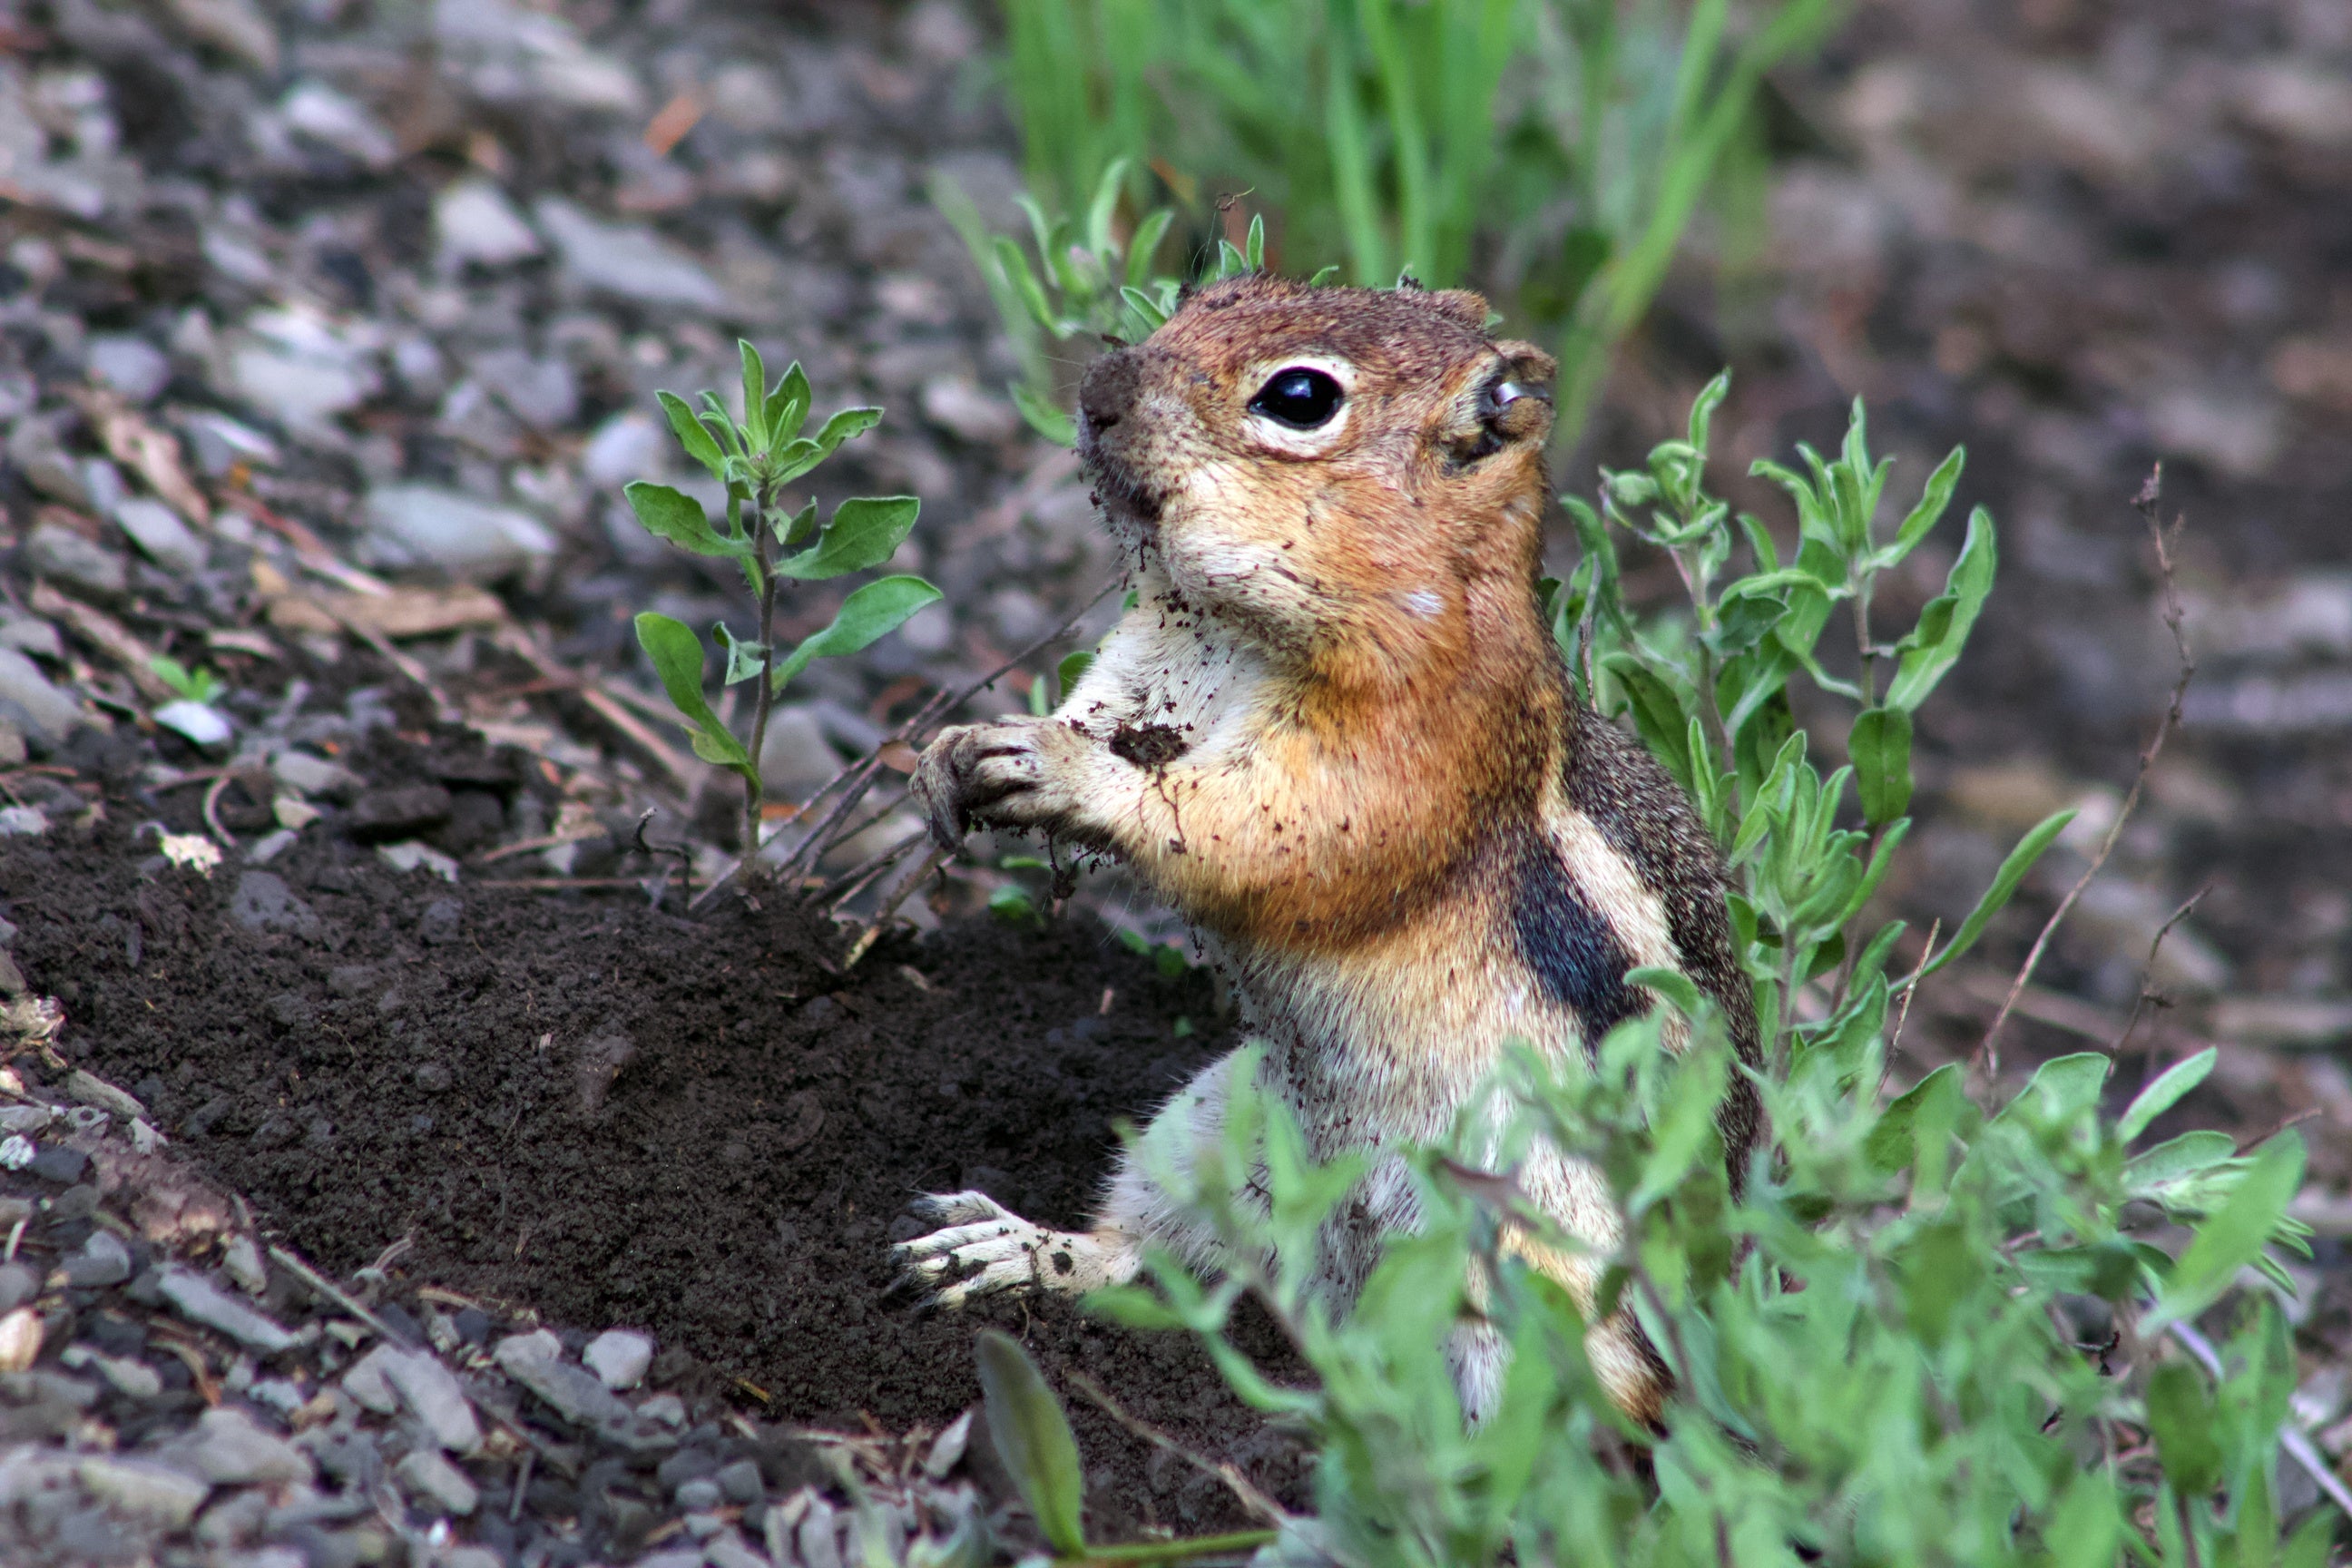 Golden mantled ground squirrel with full cheeks